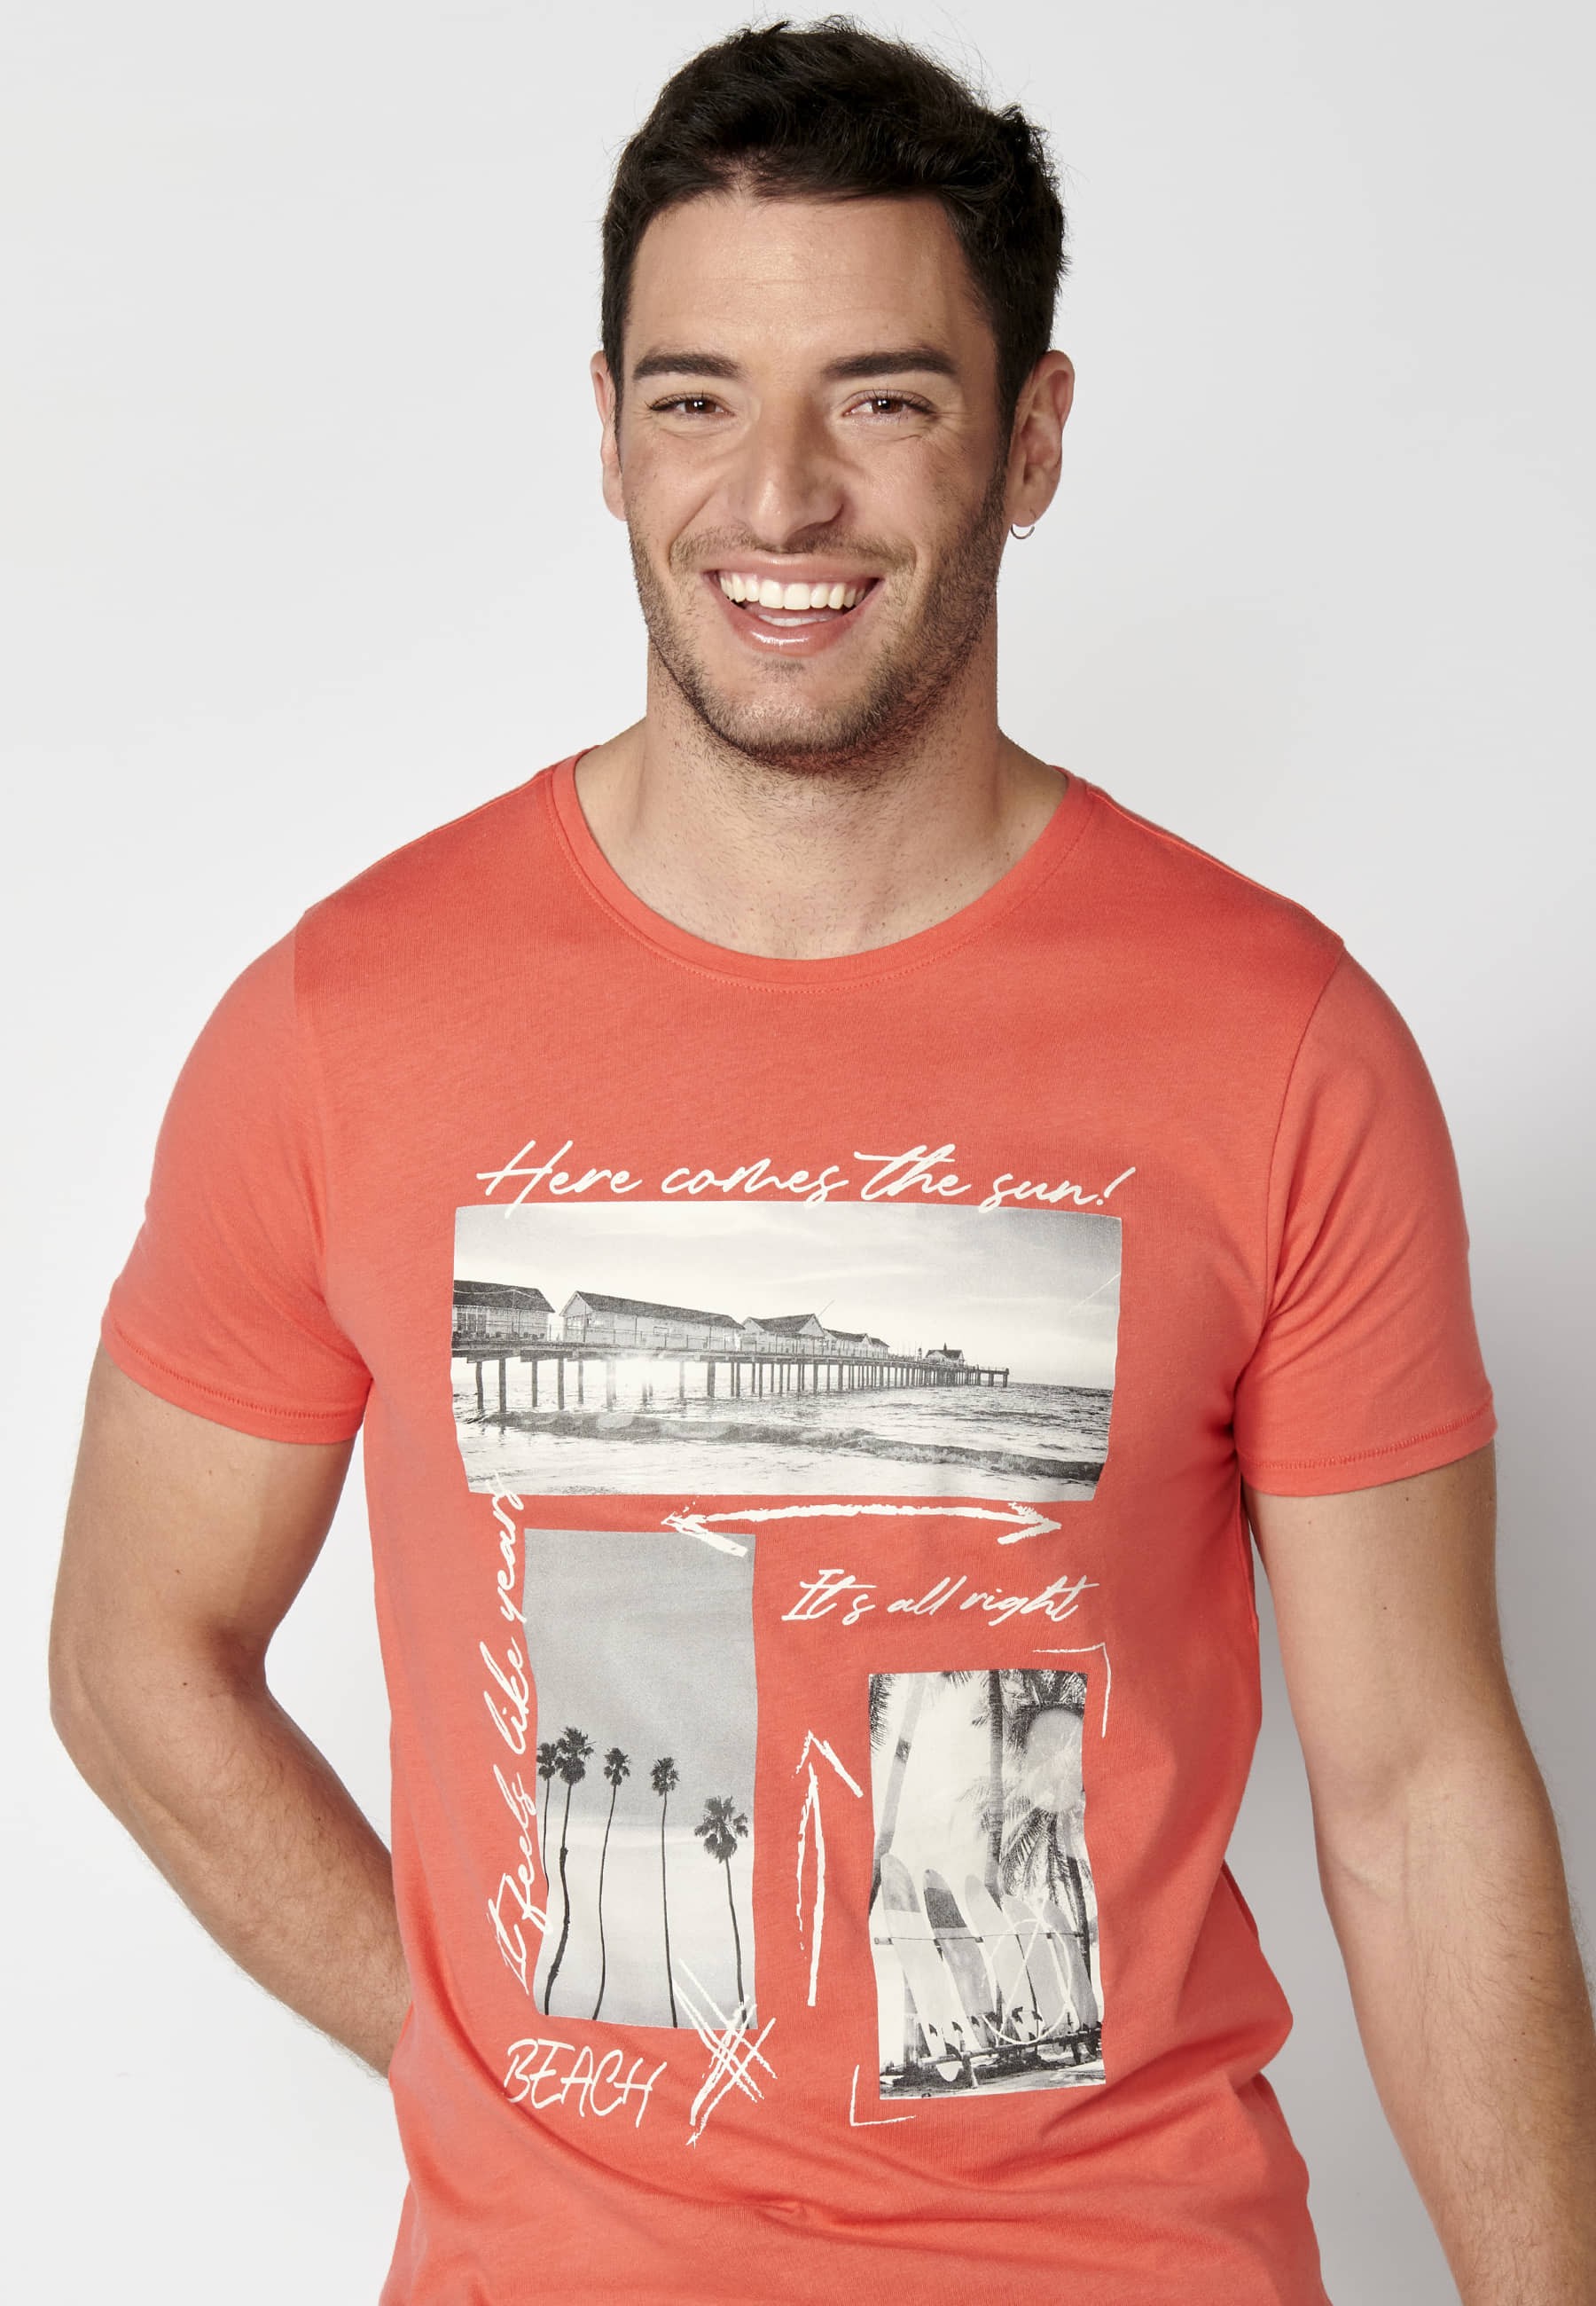 Short-sleeved Cotton T-shirt with pink front print for Men